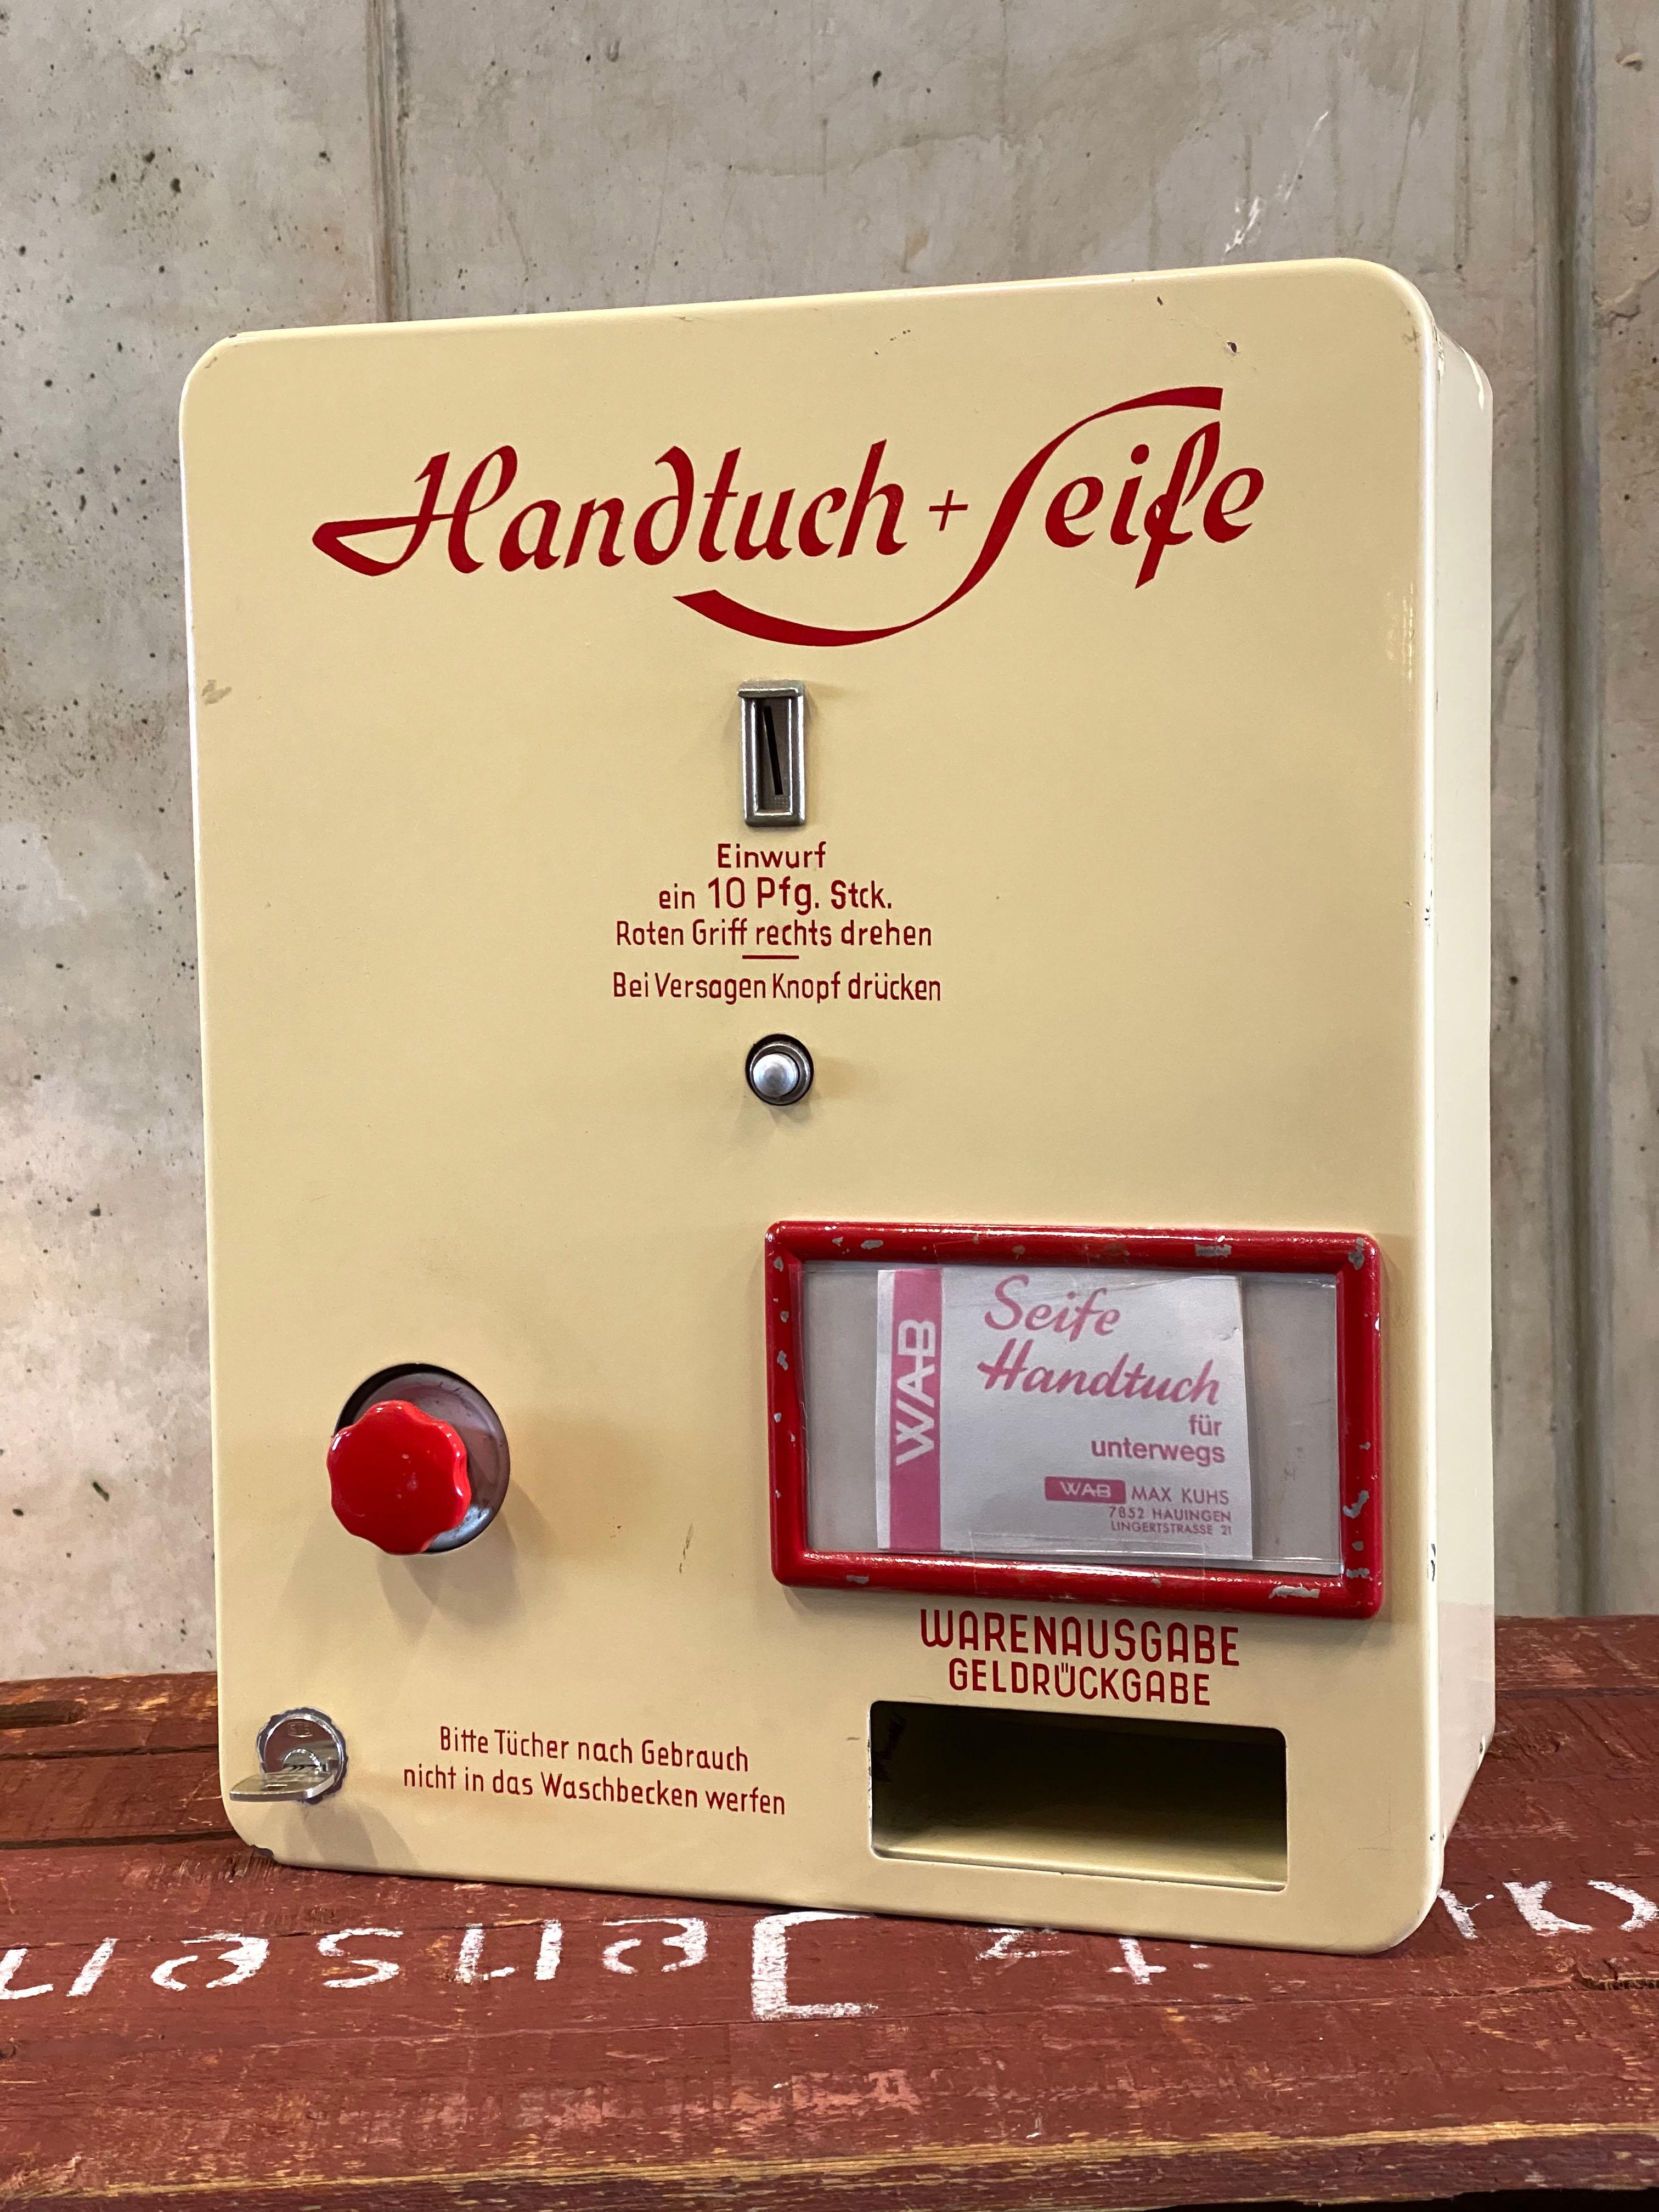 The towel & soap machine is from the 1960s and is in very good condition.
It works perfectly, has a key and you can use it with European 5 cent coins. A sample of the original filling (towel and soap) comes with it.
The really great thing about